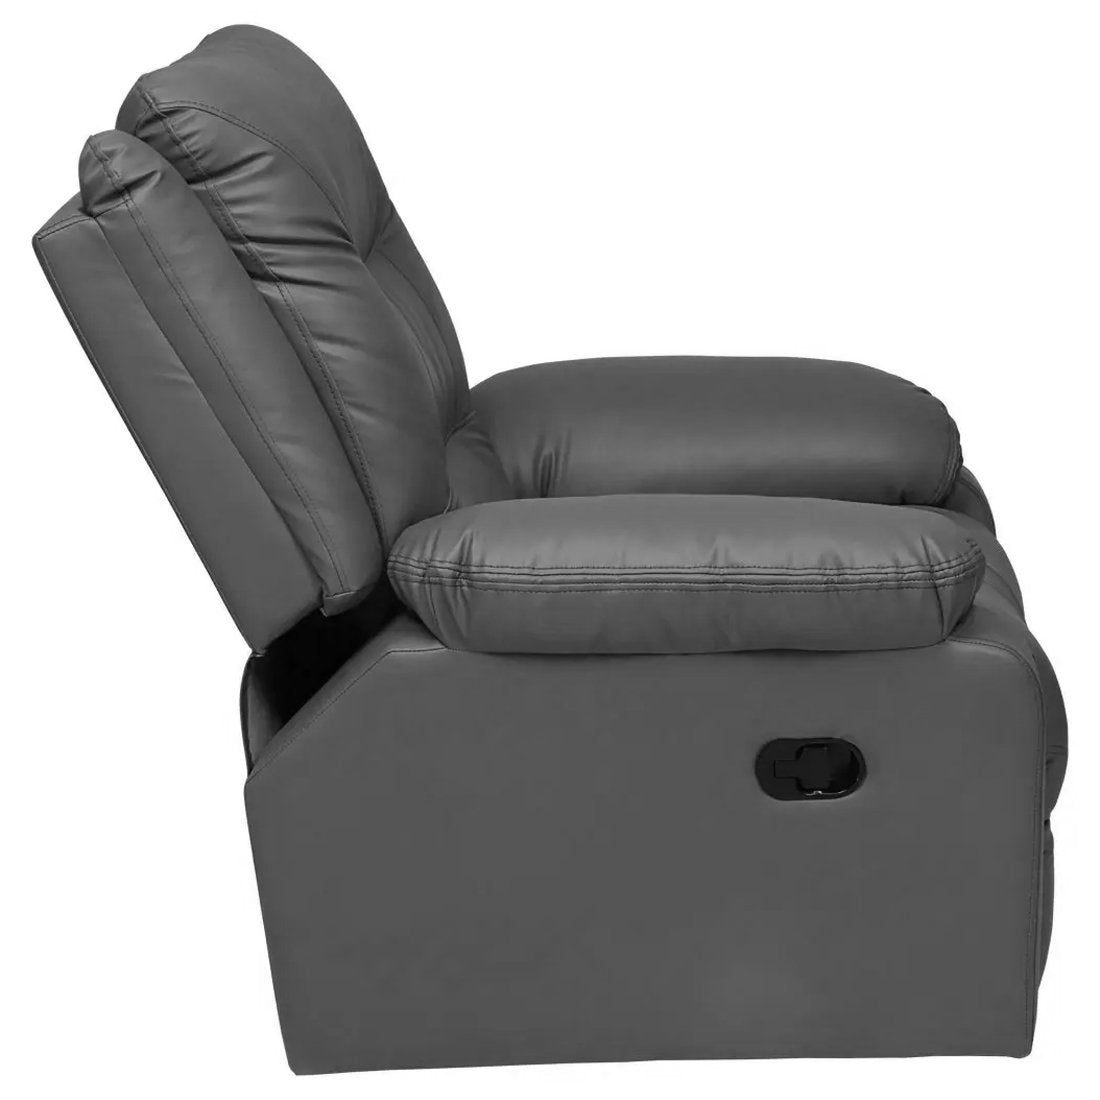 1 Seat Recliner Sofa with Premium Leatherette, Grey